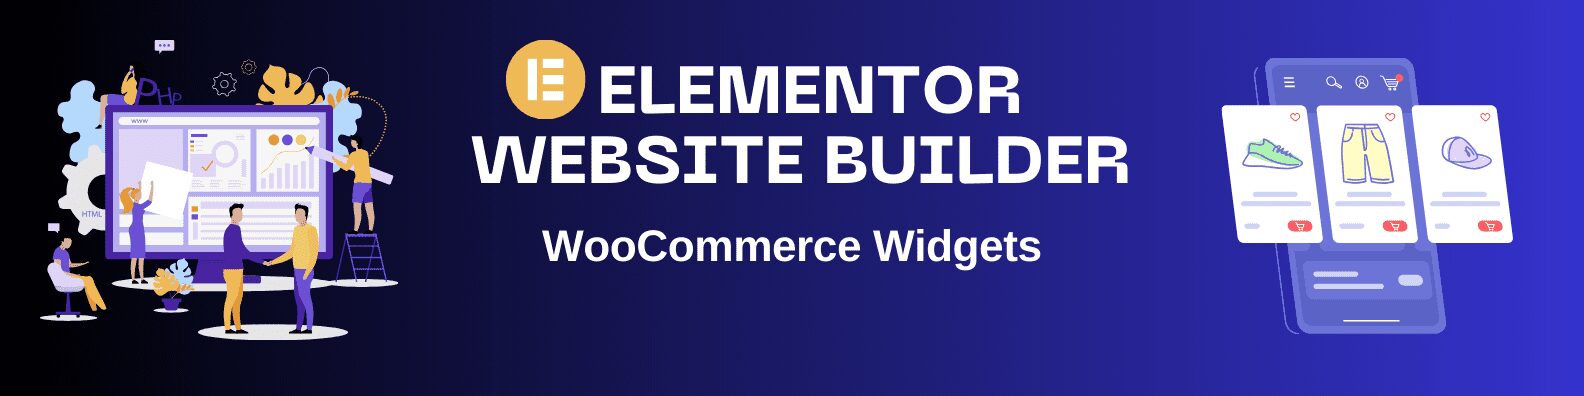 WooCommerce Widgets for the Perfect Online Store Design